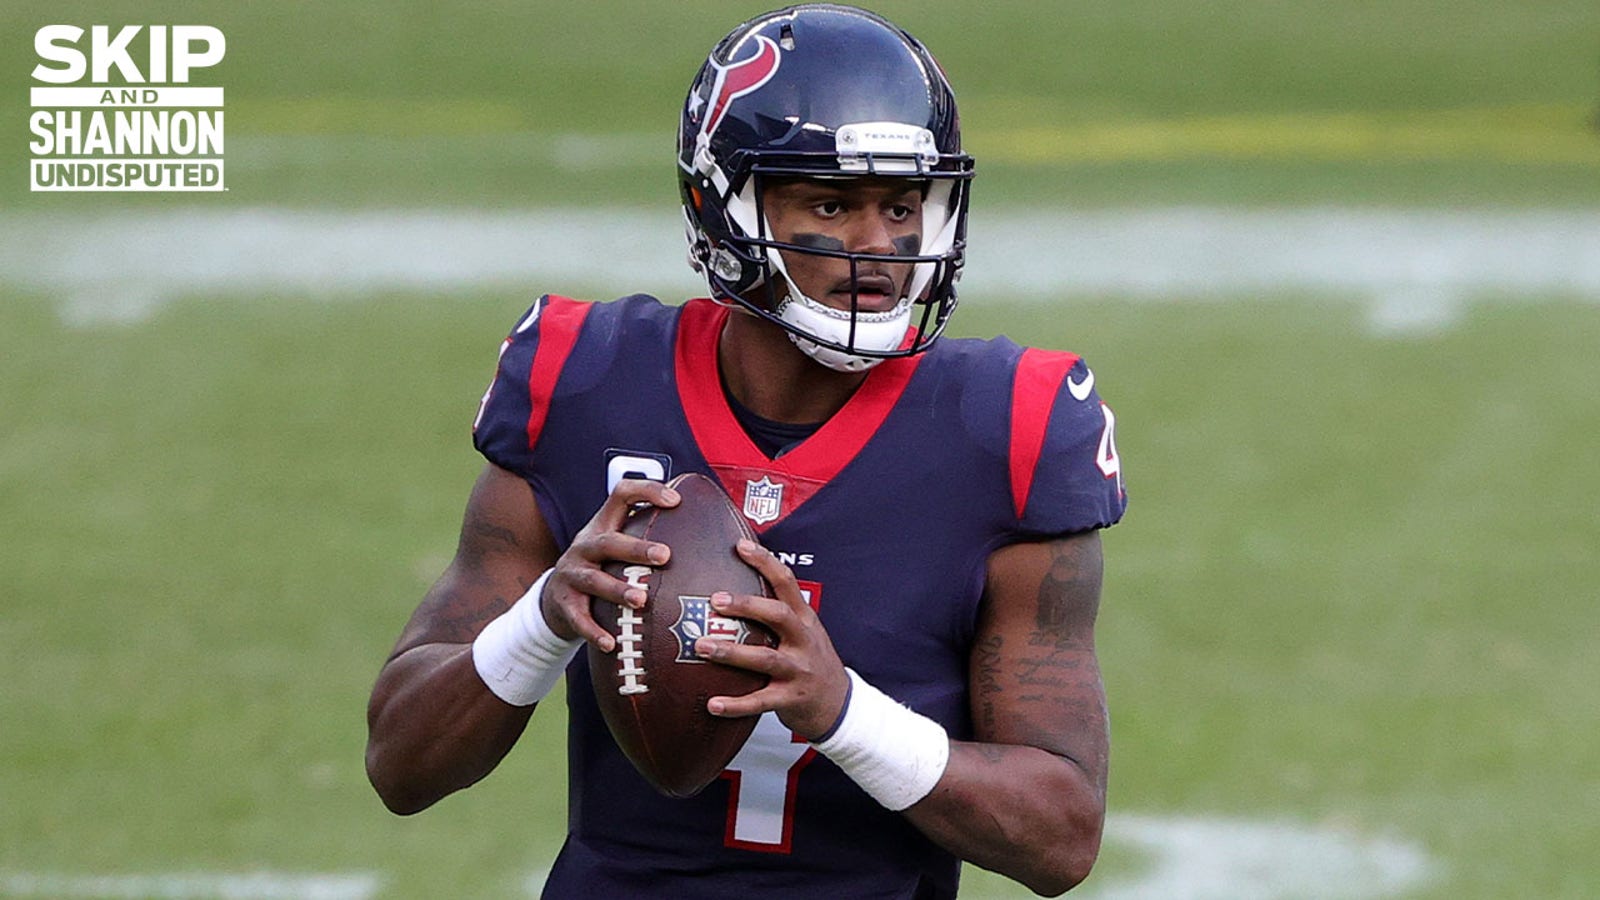 Deshaun Watson pens five-year, $230M deal with Browns